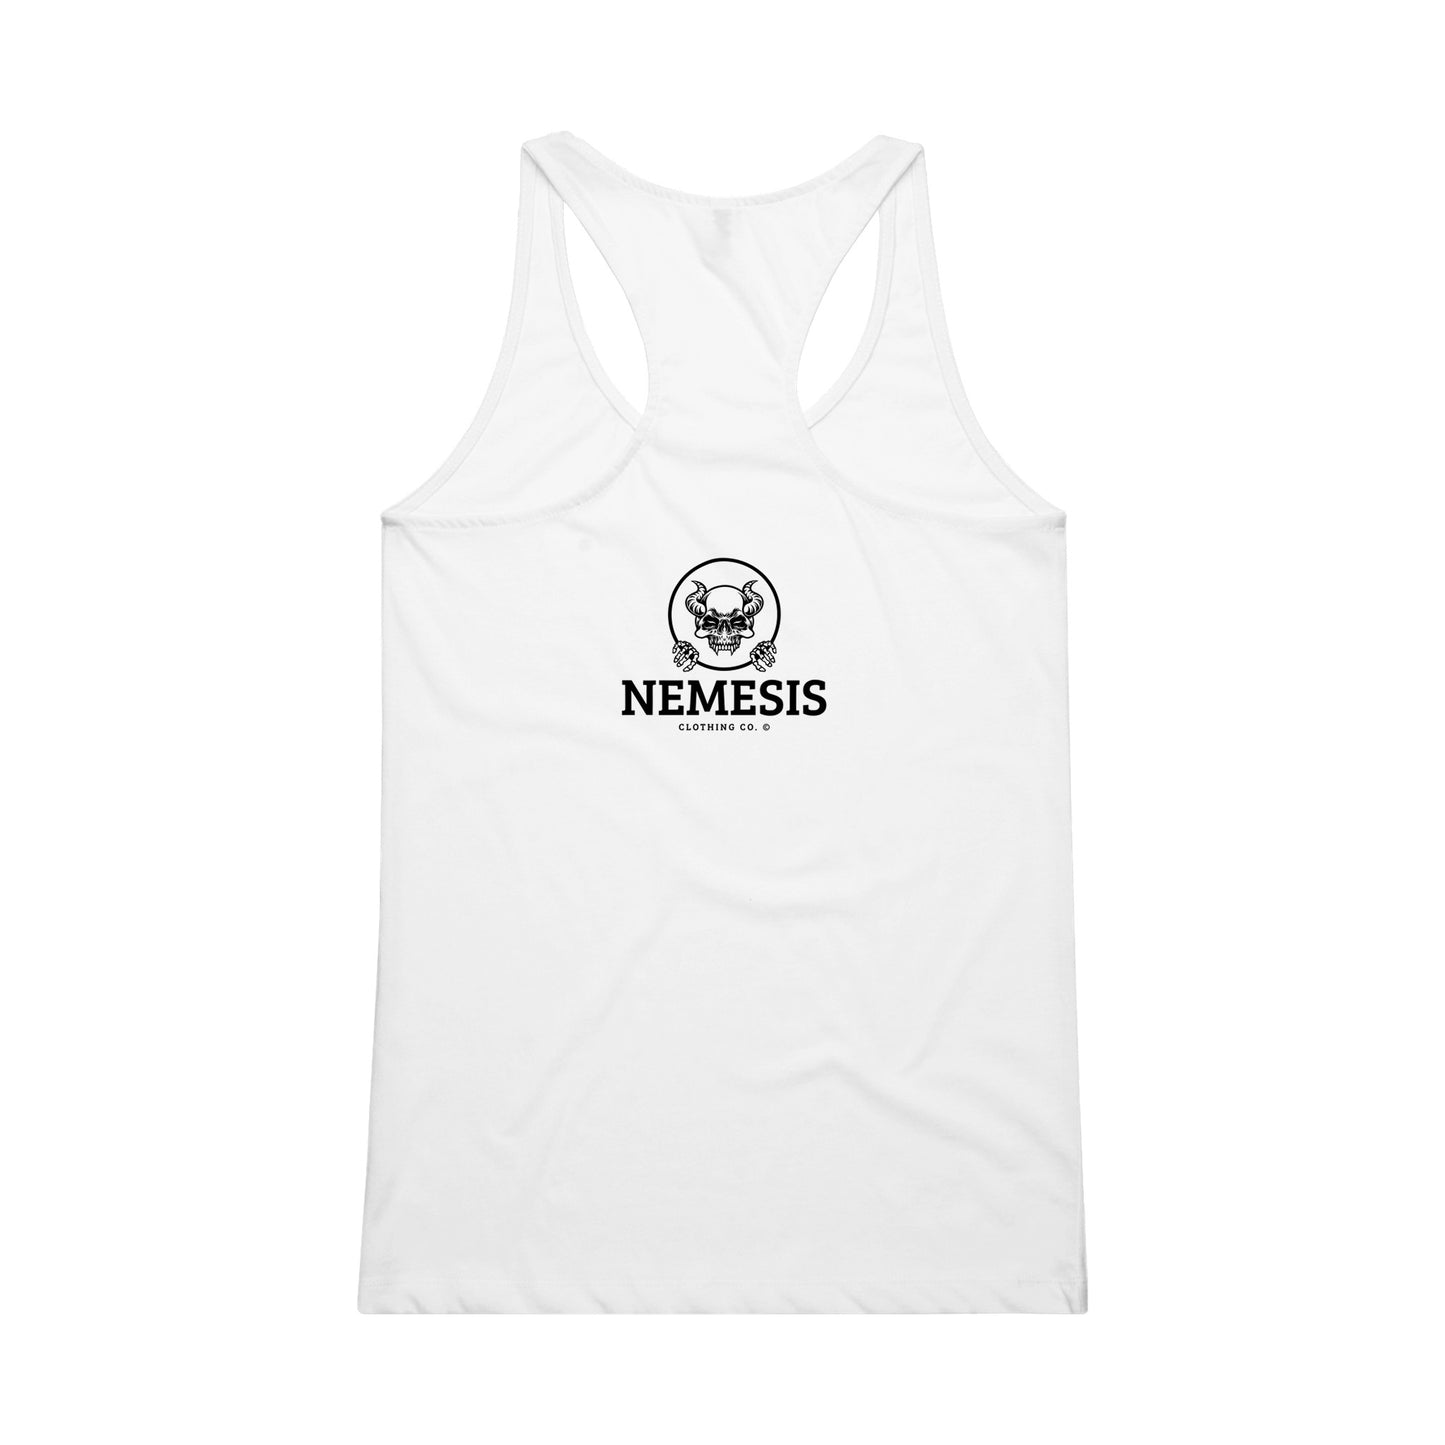 The "I AM..." Performance Womens Tank Top